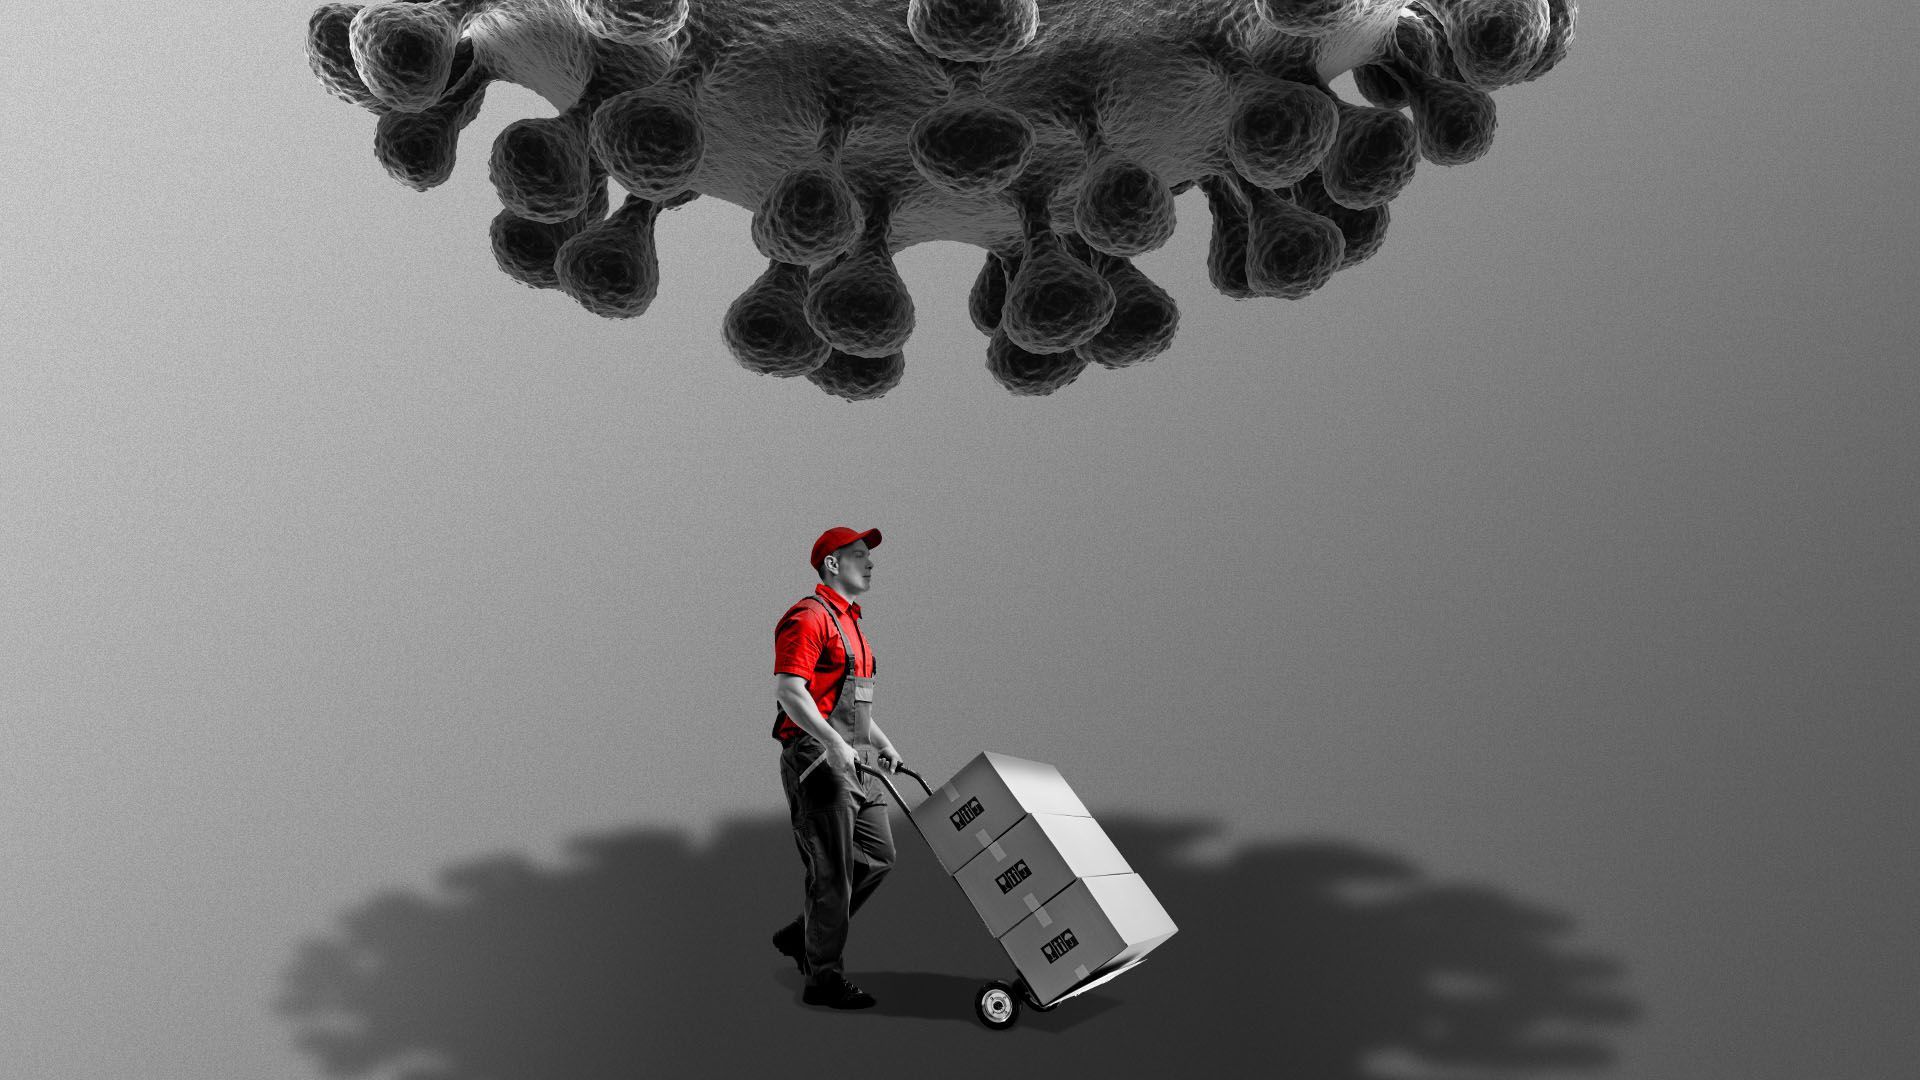 Illustration of a man delivering packages with a giant virus floating ominously above him